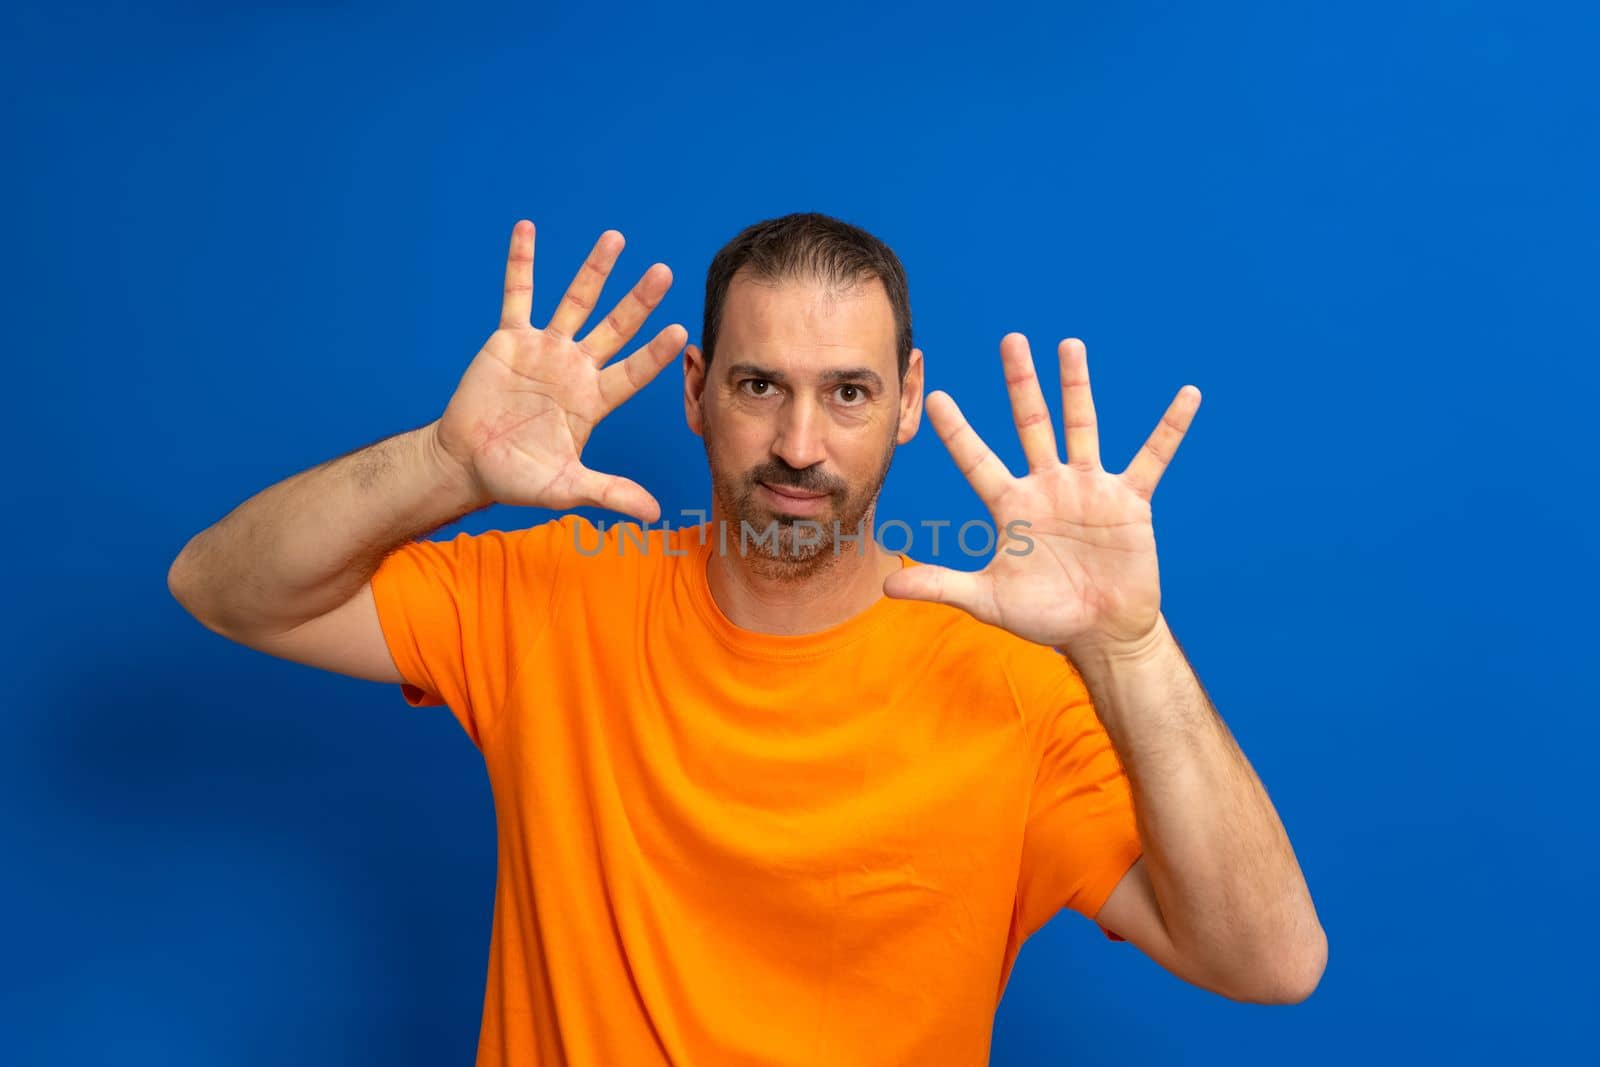 Front view of a Caucasian man with short hair wearing an orange t-shirt with his palms facing him, camera facing palm, touching an interactive virtual screen